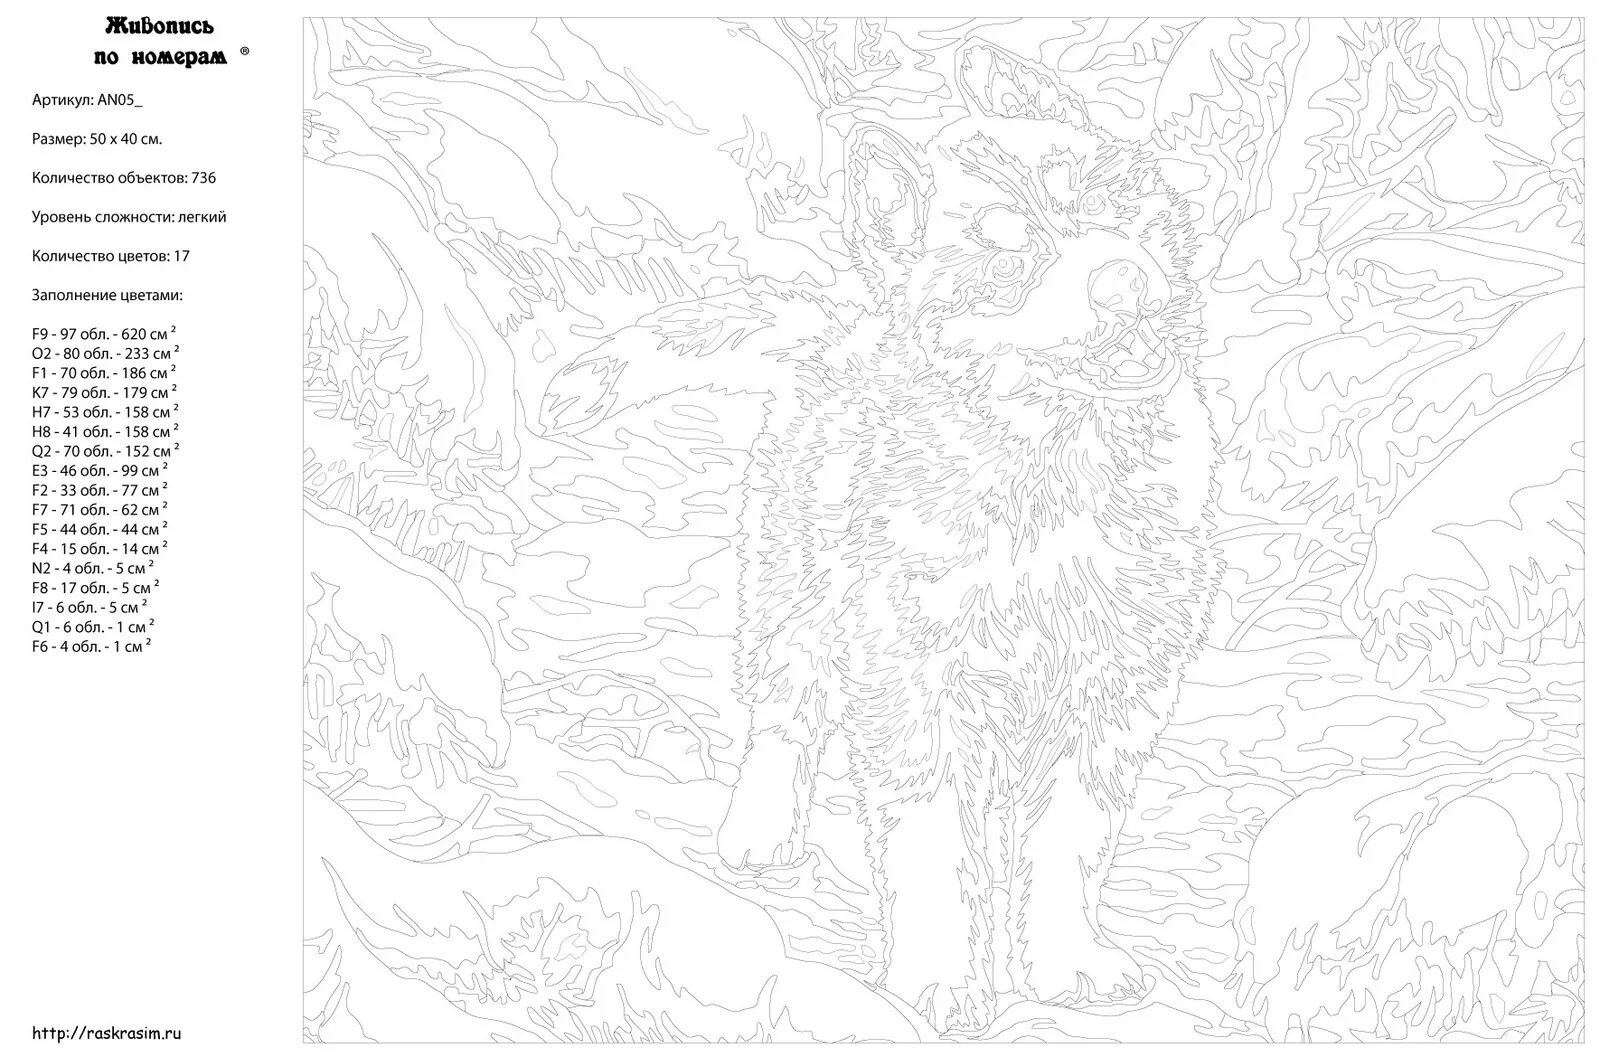 Exceptional coloring page by numbers torrent program